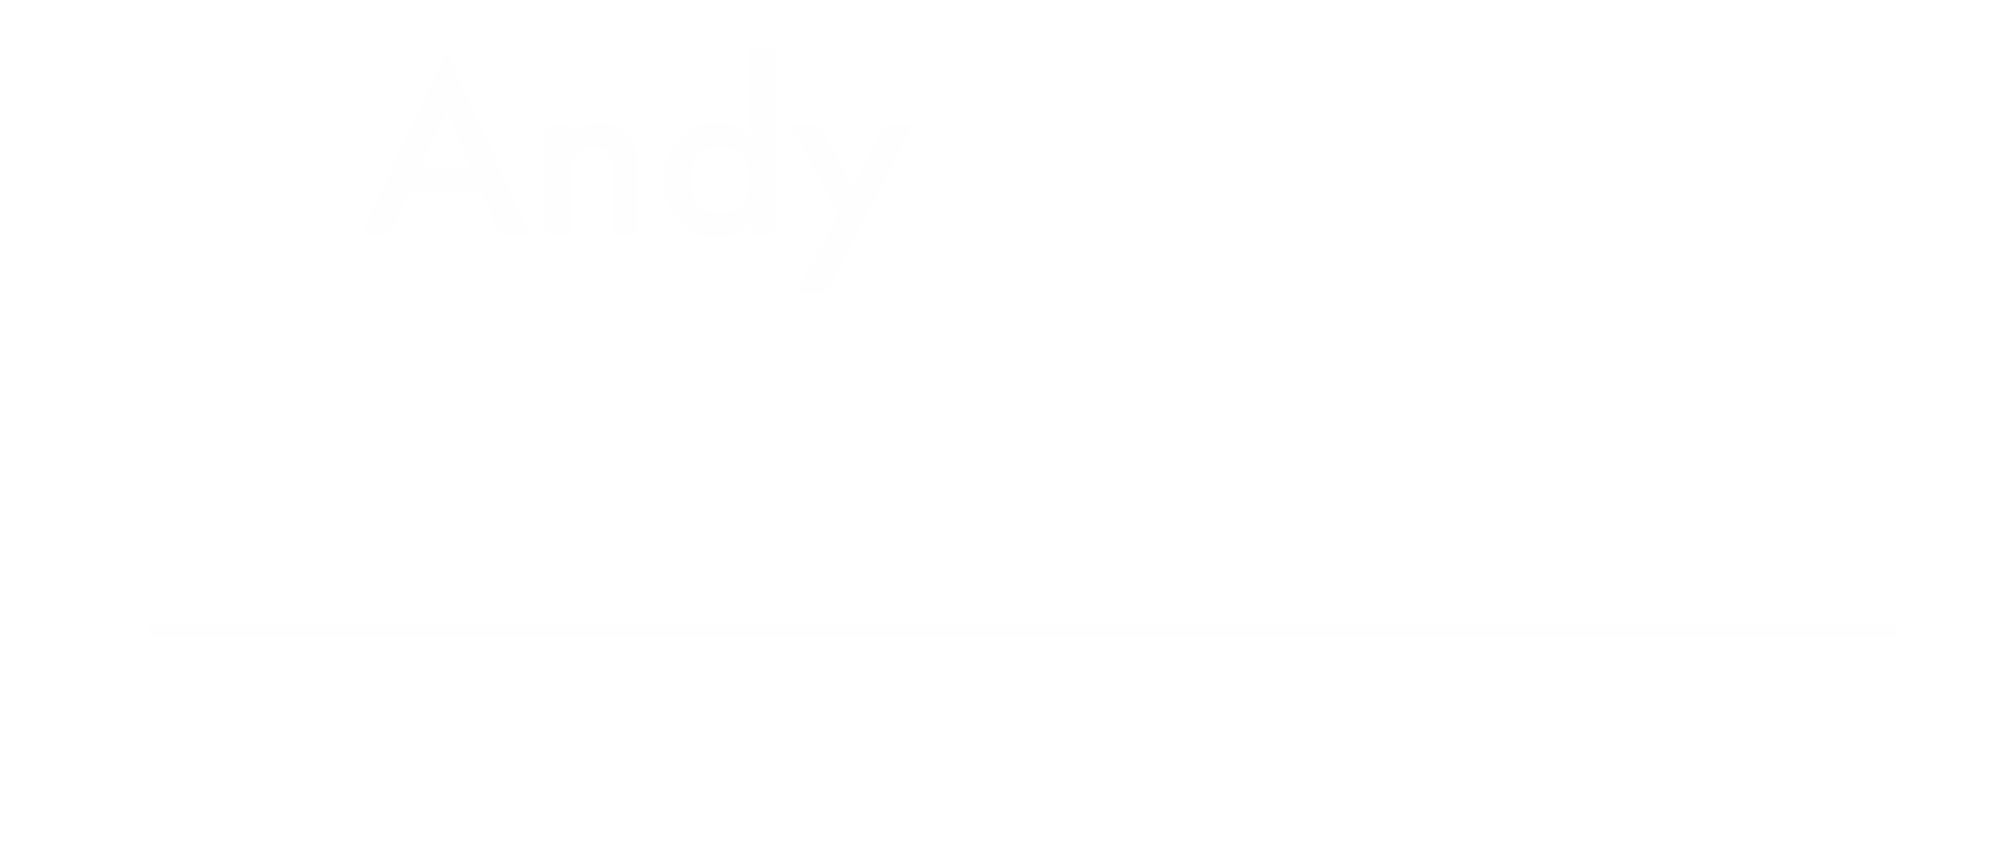 Andy Sanborn for Congress